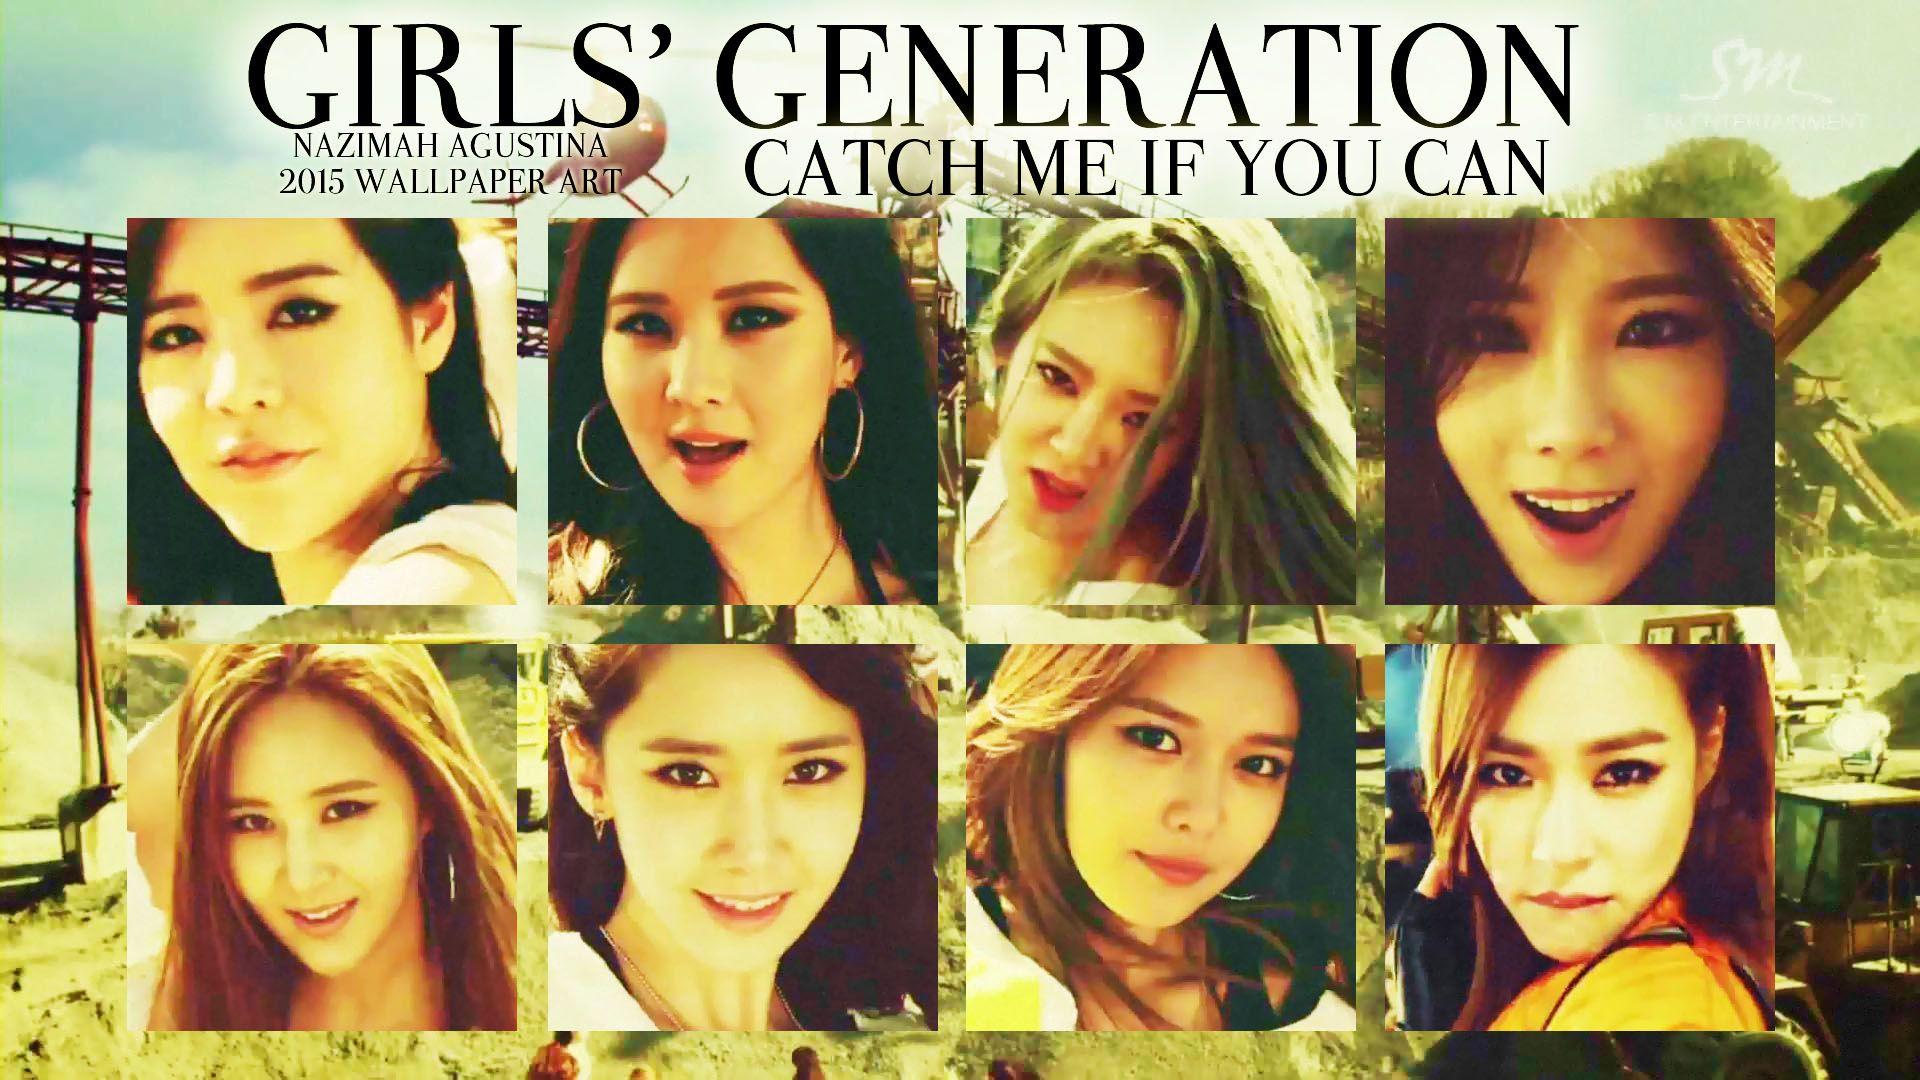 Snsd girls’ generation catch me if you can wallpapers by nazimah